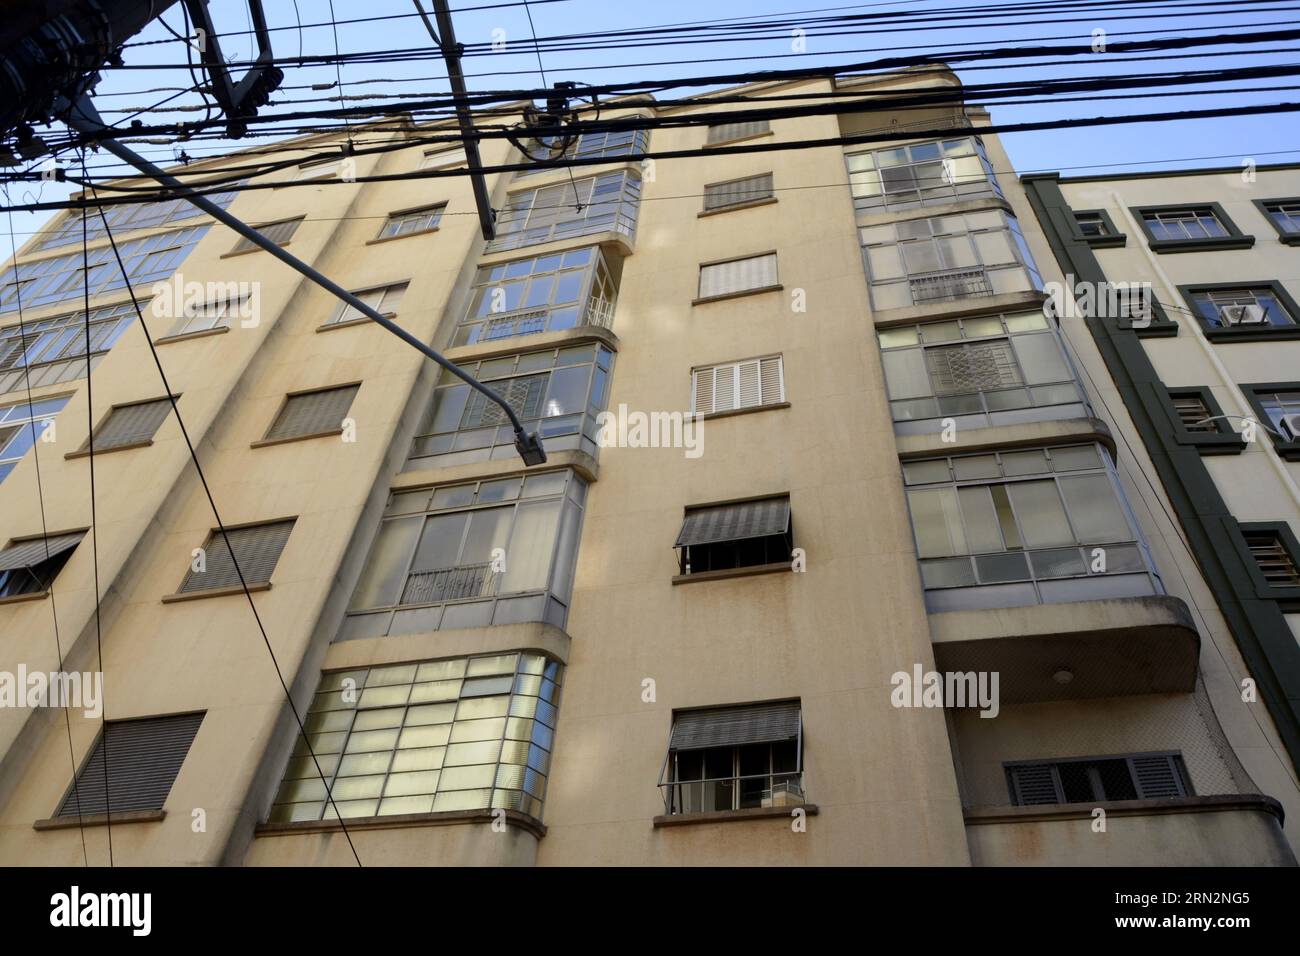 Facade of an old building with a bottom-up view with windows and glass with a tangle of wires. Stock Photo